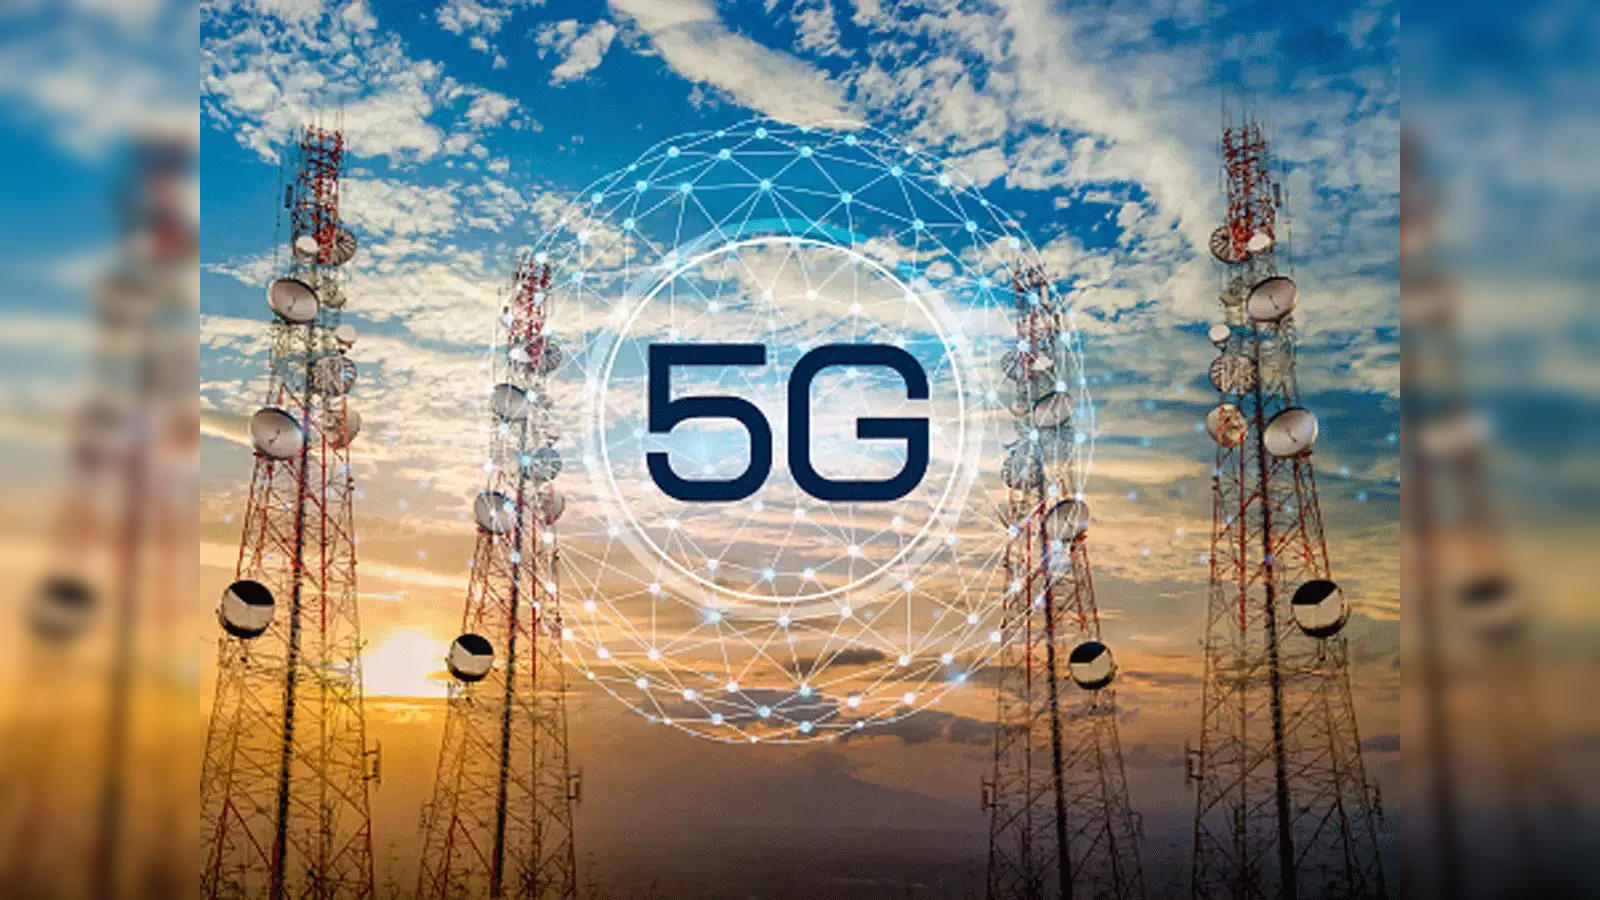 Norms Soon to Let Telcos Lease 5G to Private Networks